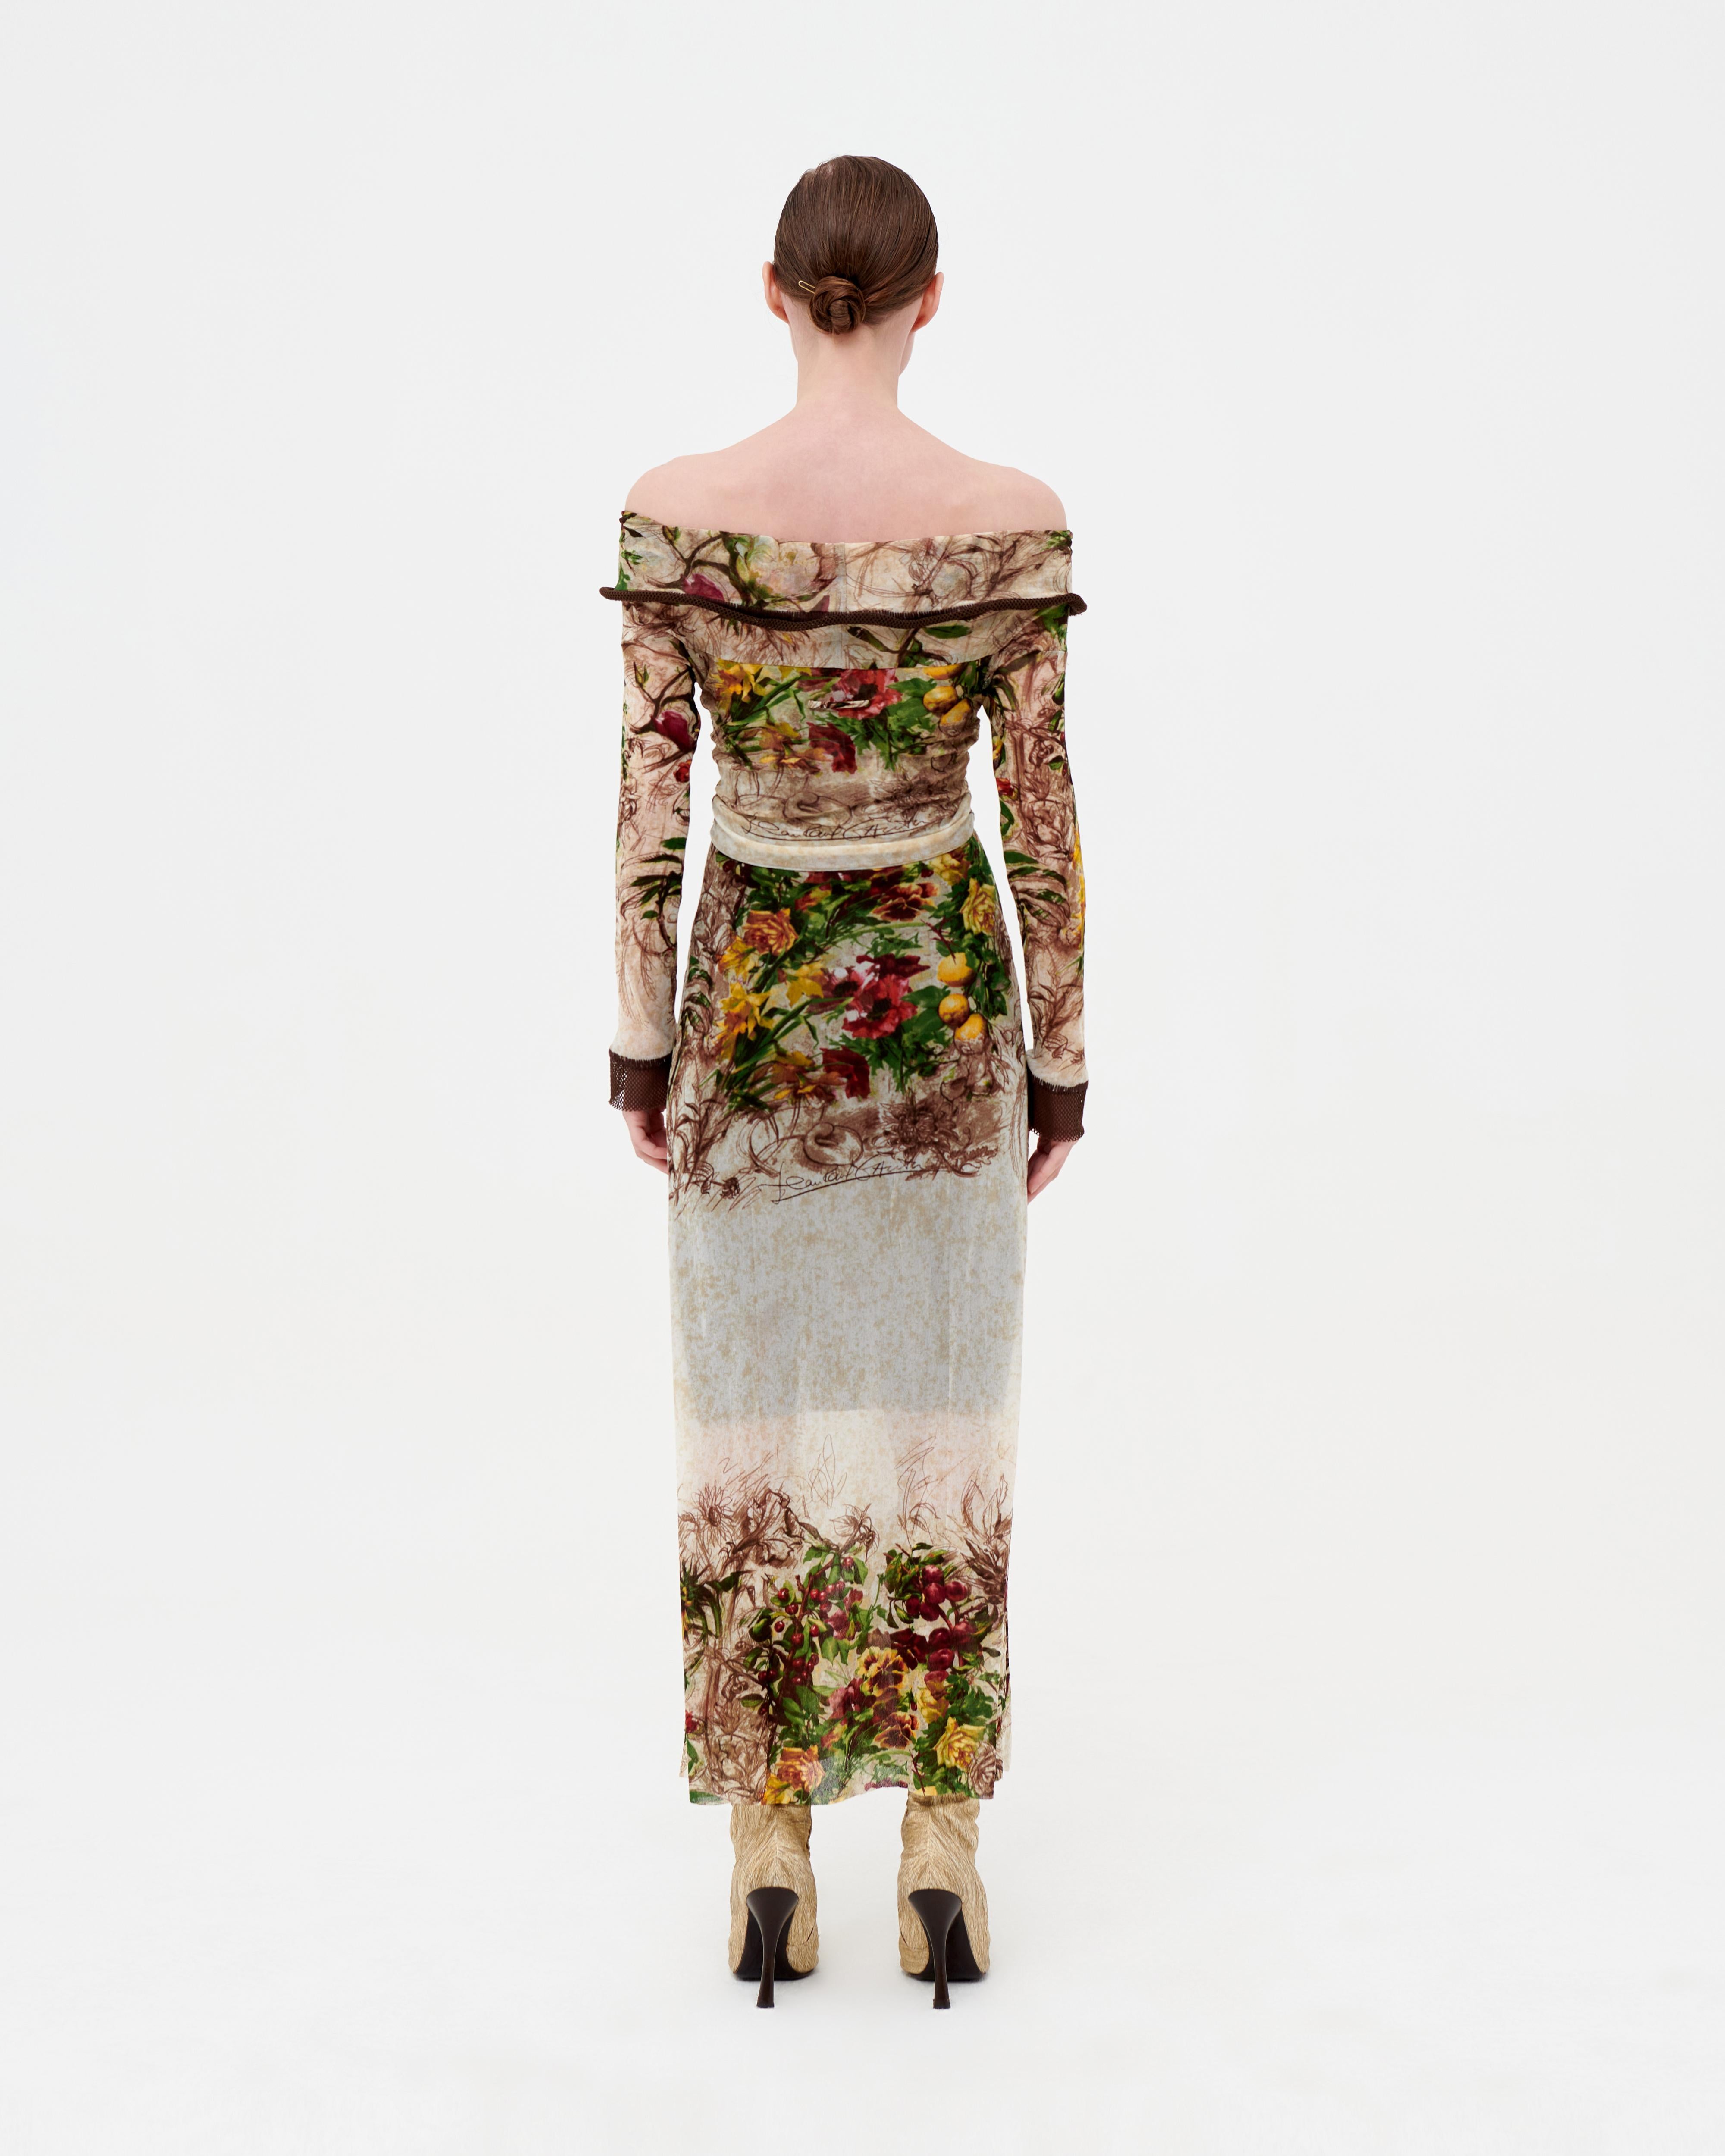 Jean Paul Gaultier S/S 1999 runway floral dress In Excellent Condition For Sale In Rome, IT